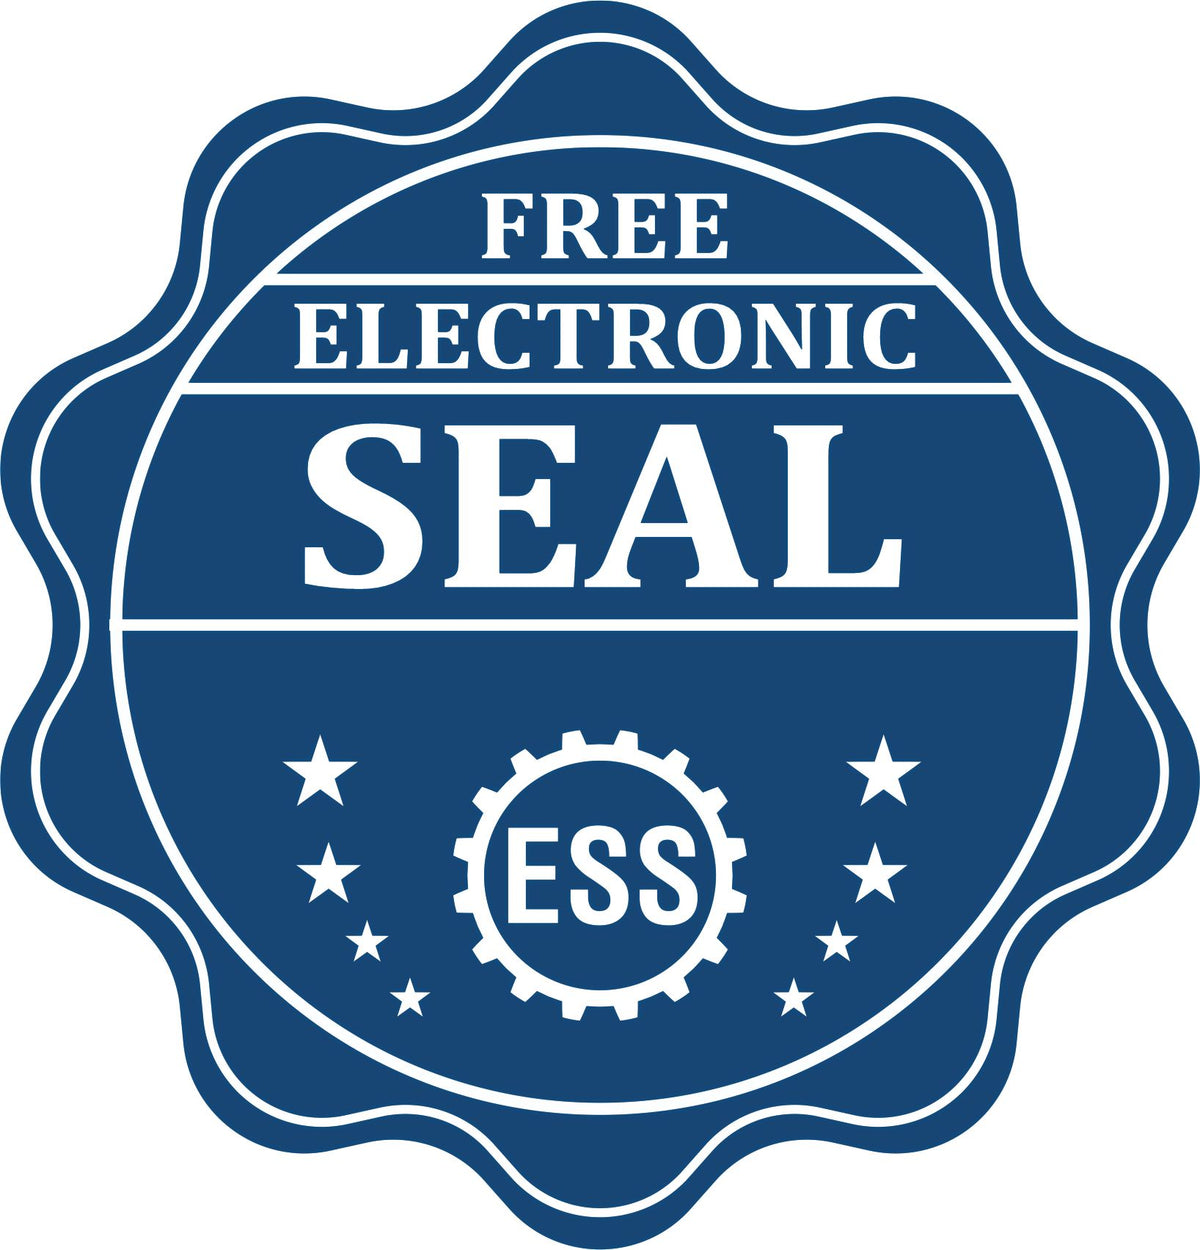 A badge showing a free electronic seal for the Premium MaxLight Pre-Inked New Jersey Engineering Stamp with stars and the ESS gear on the emblem.